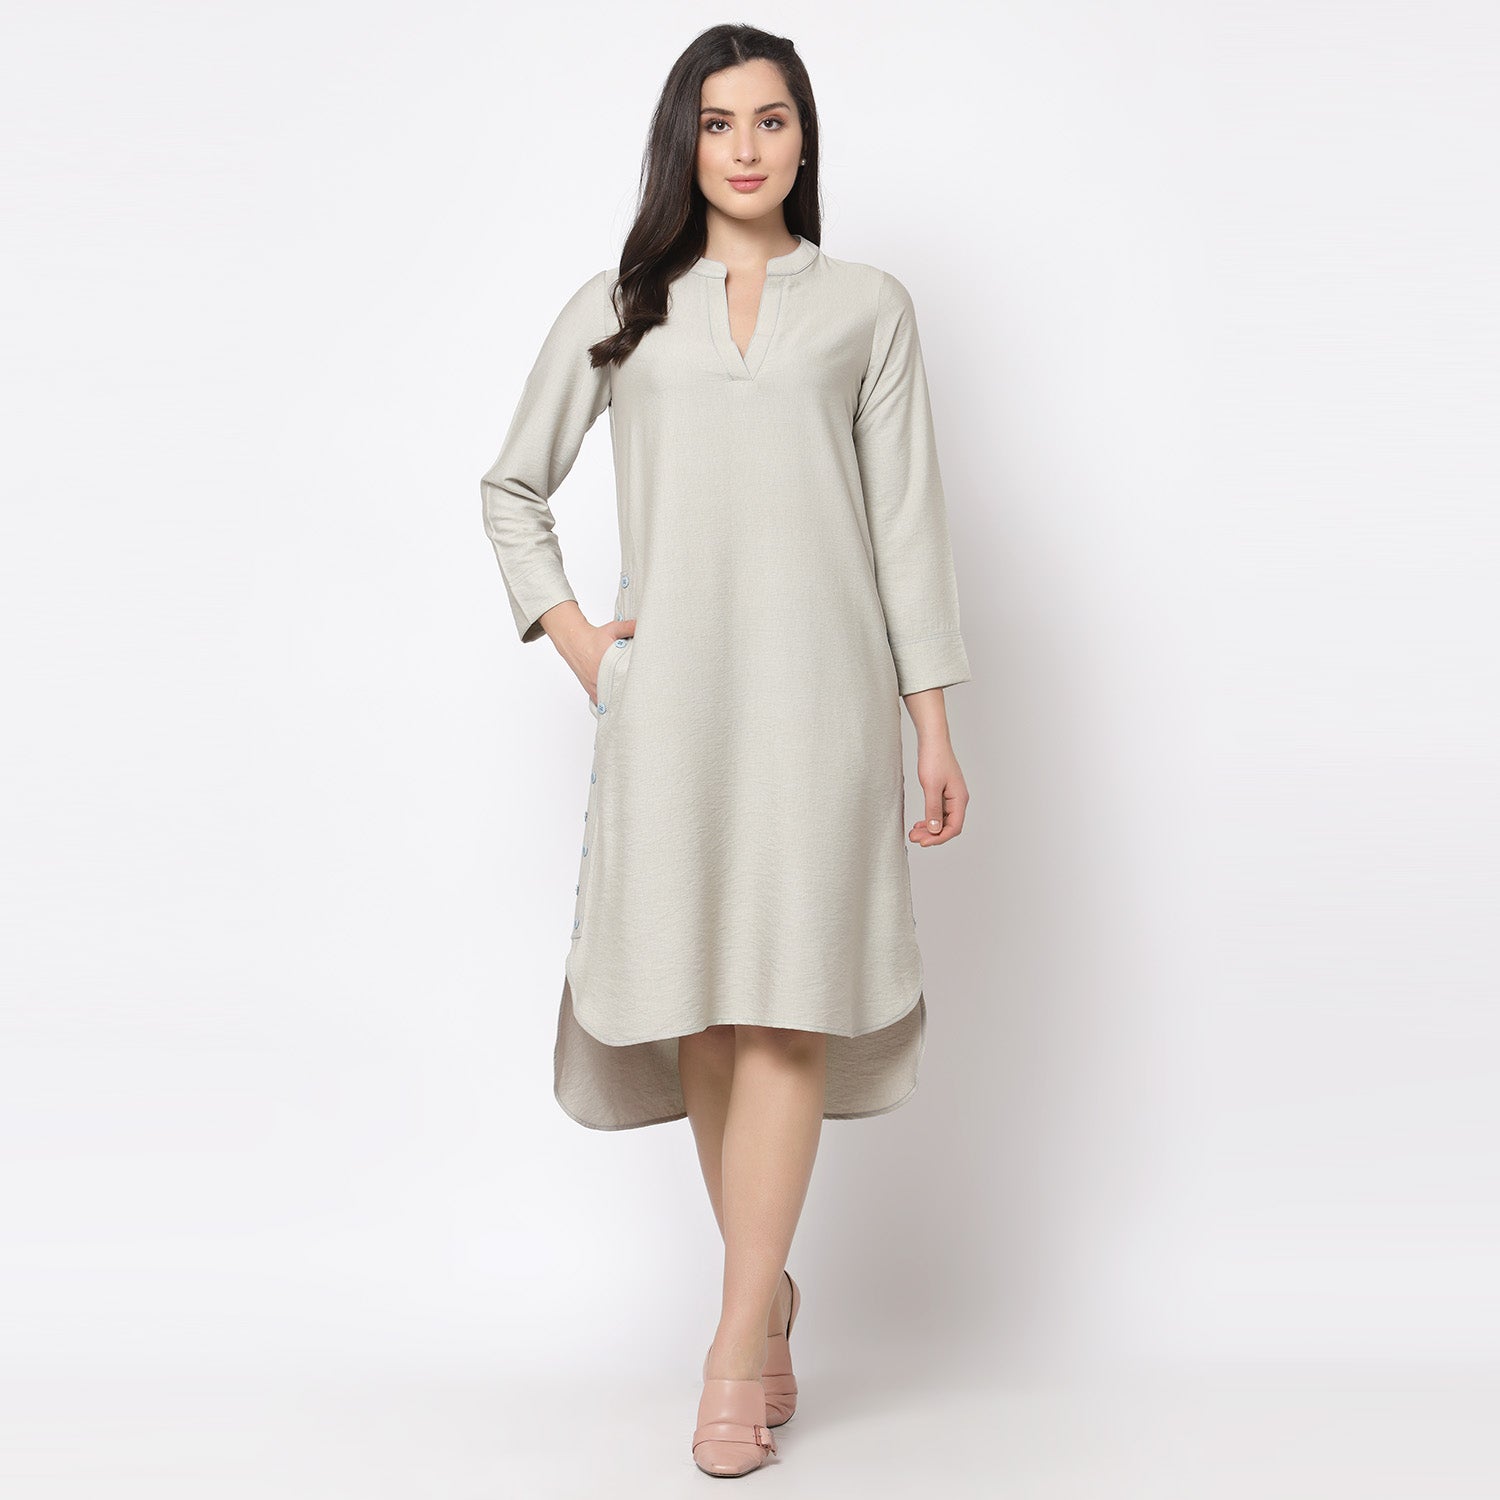 Grey linen kurta style tunic with buttons